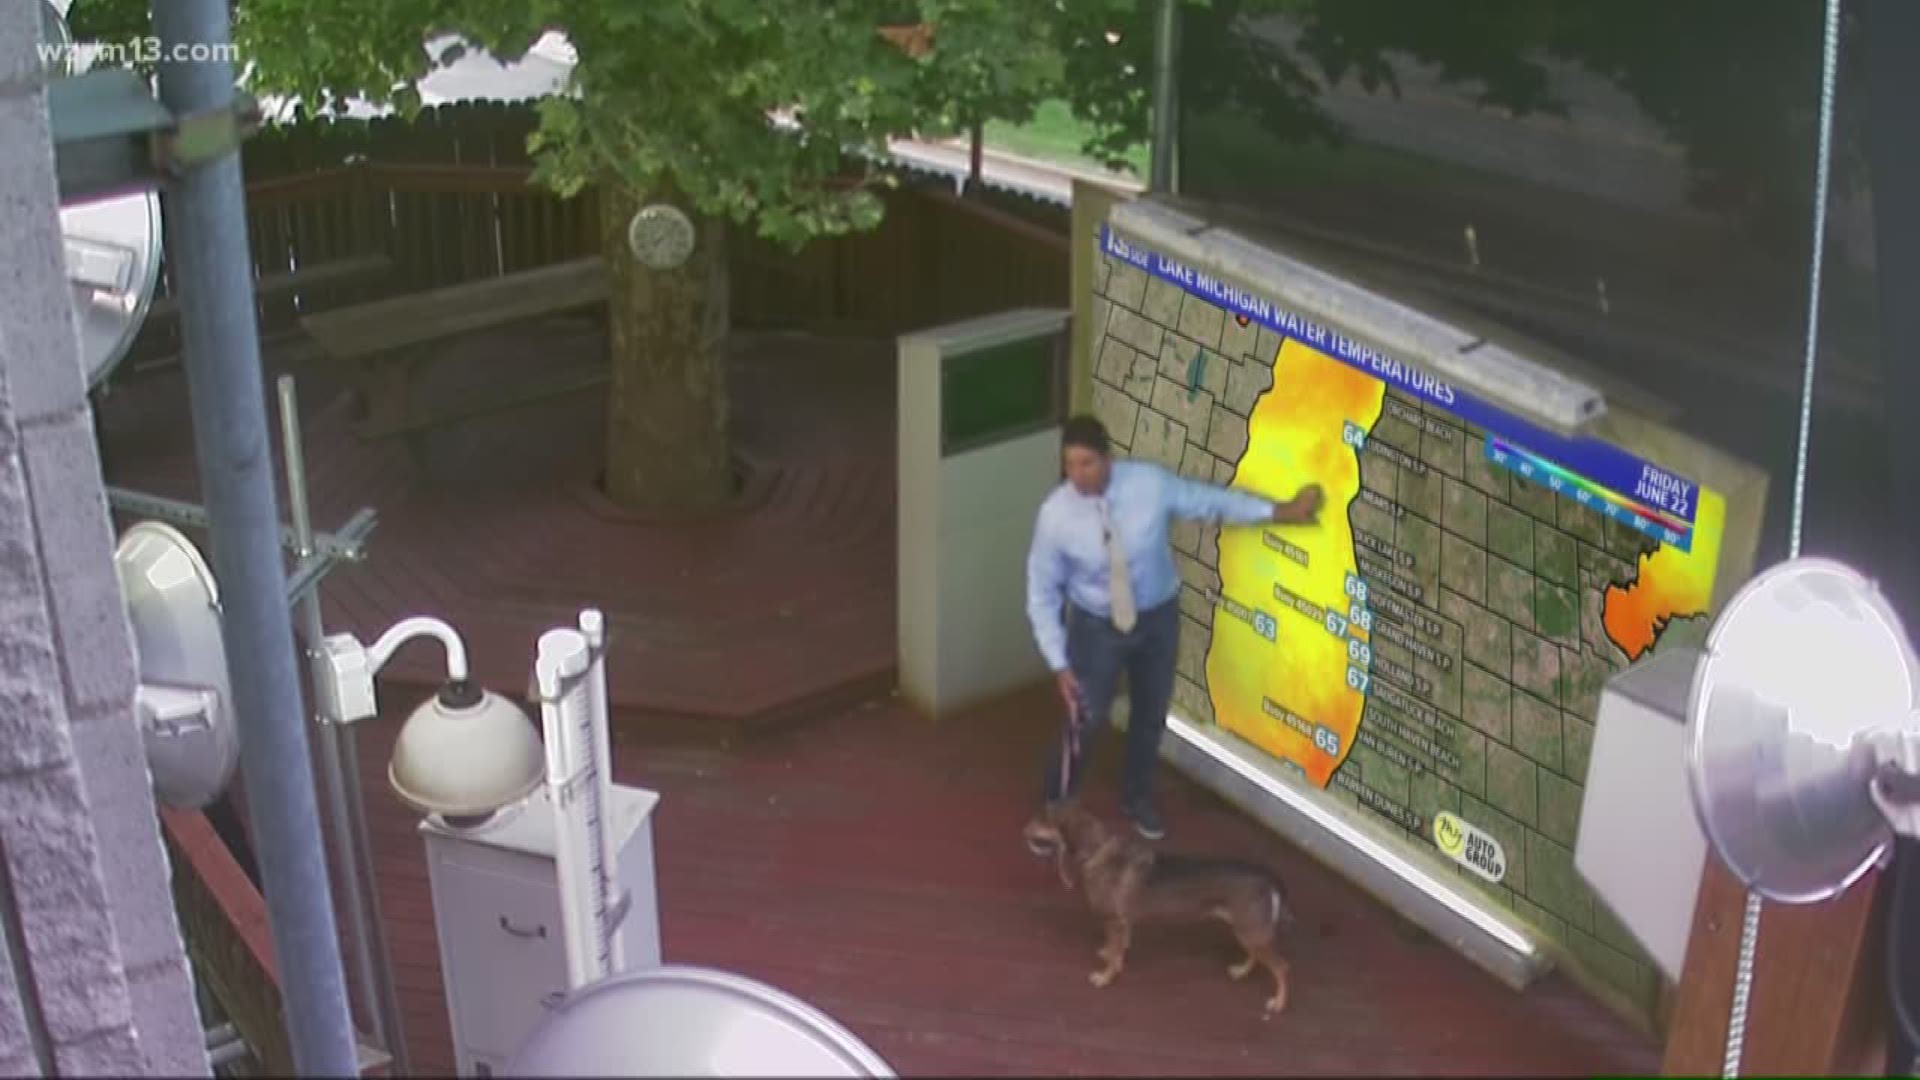 For #TakeYourDogToWorkDay Harmony helps meteorologist Aaron Ofseyer tell the forecast on My West Michigan.